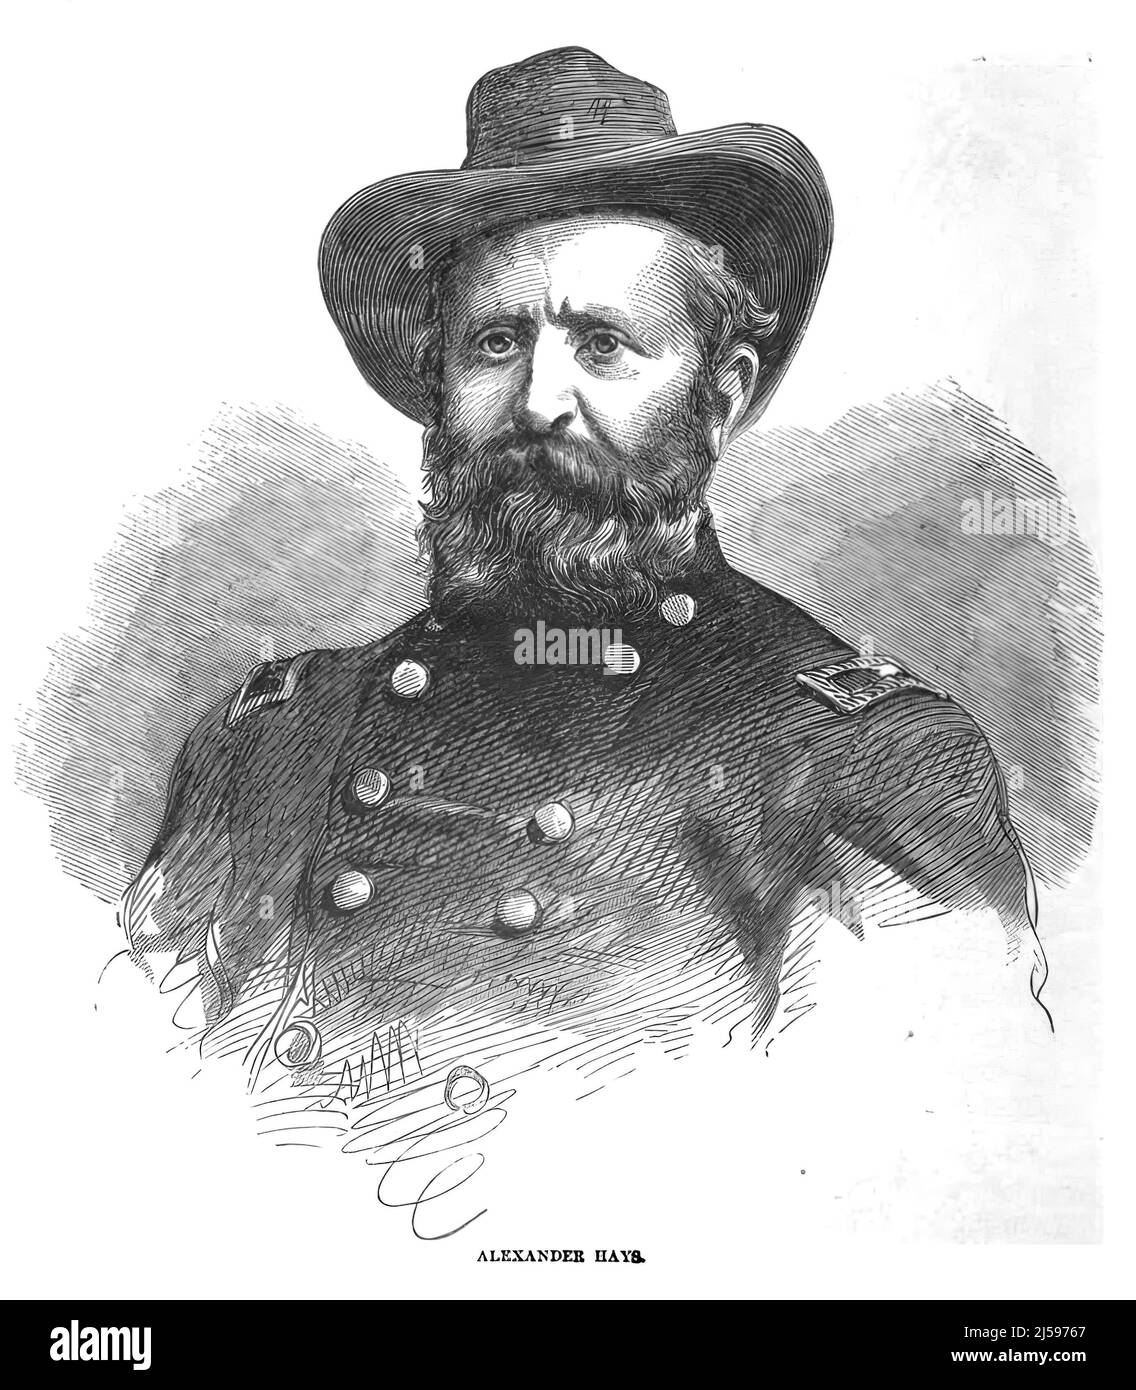 Portrait of Alexander Hays, Union Army General in the American Civil War. 19th century illustration Stock Photo